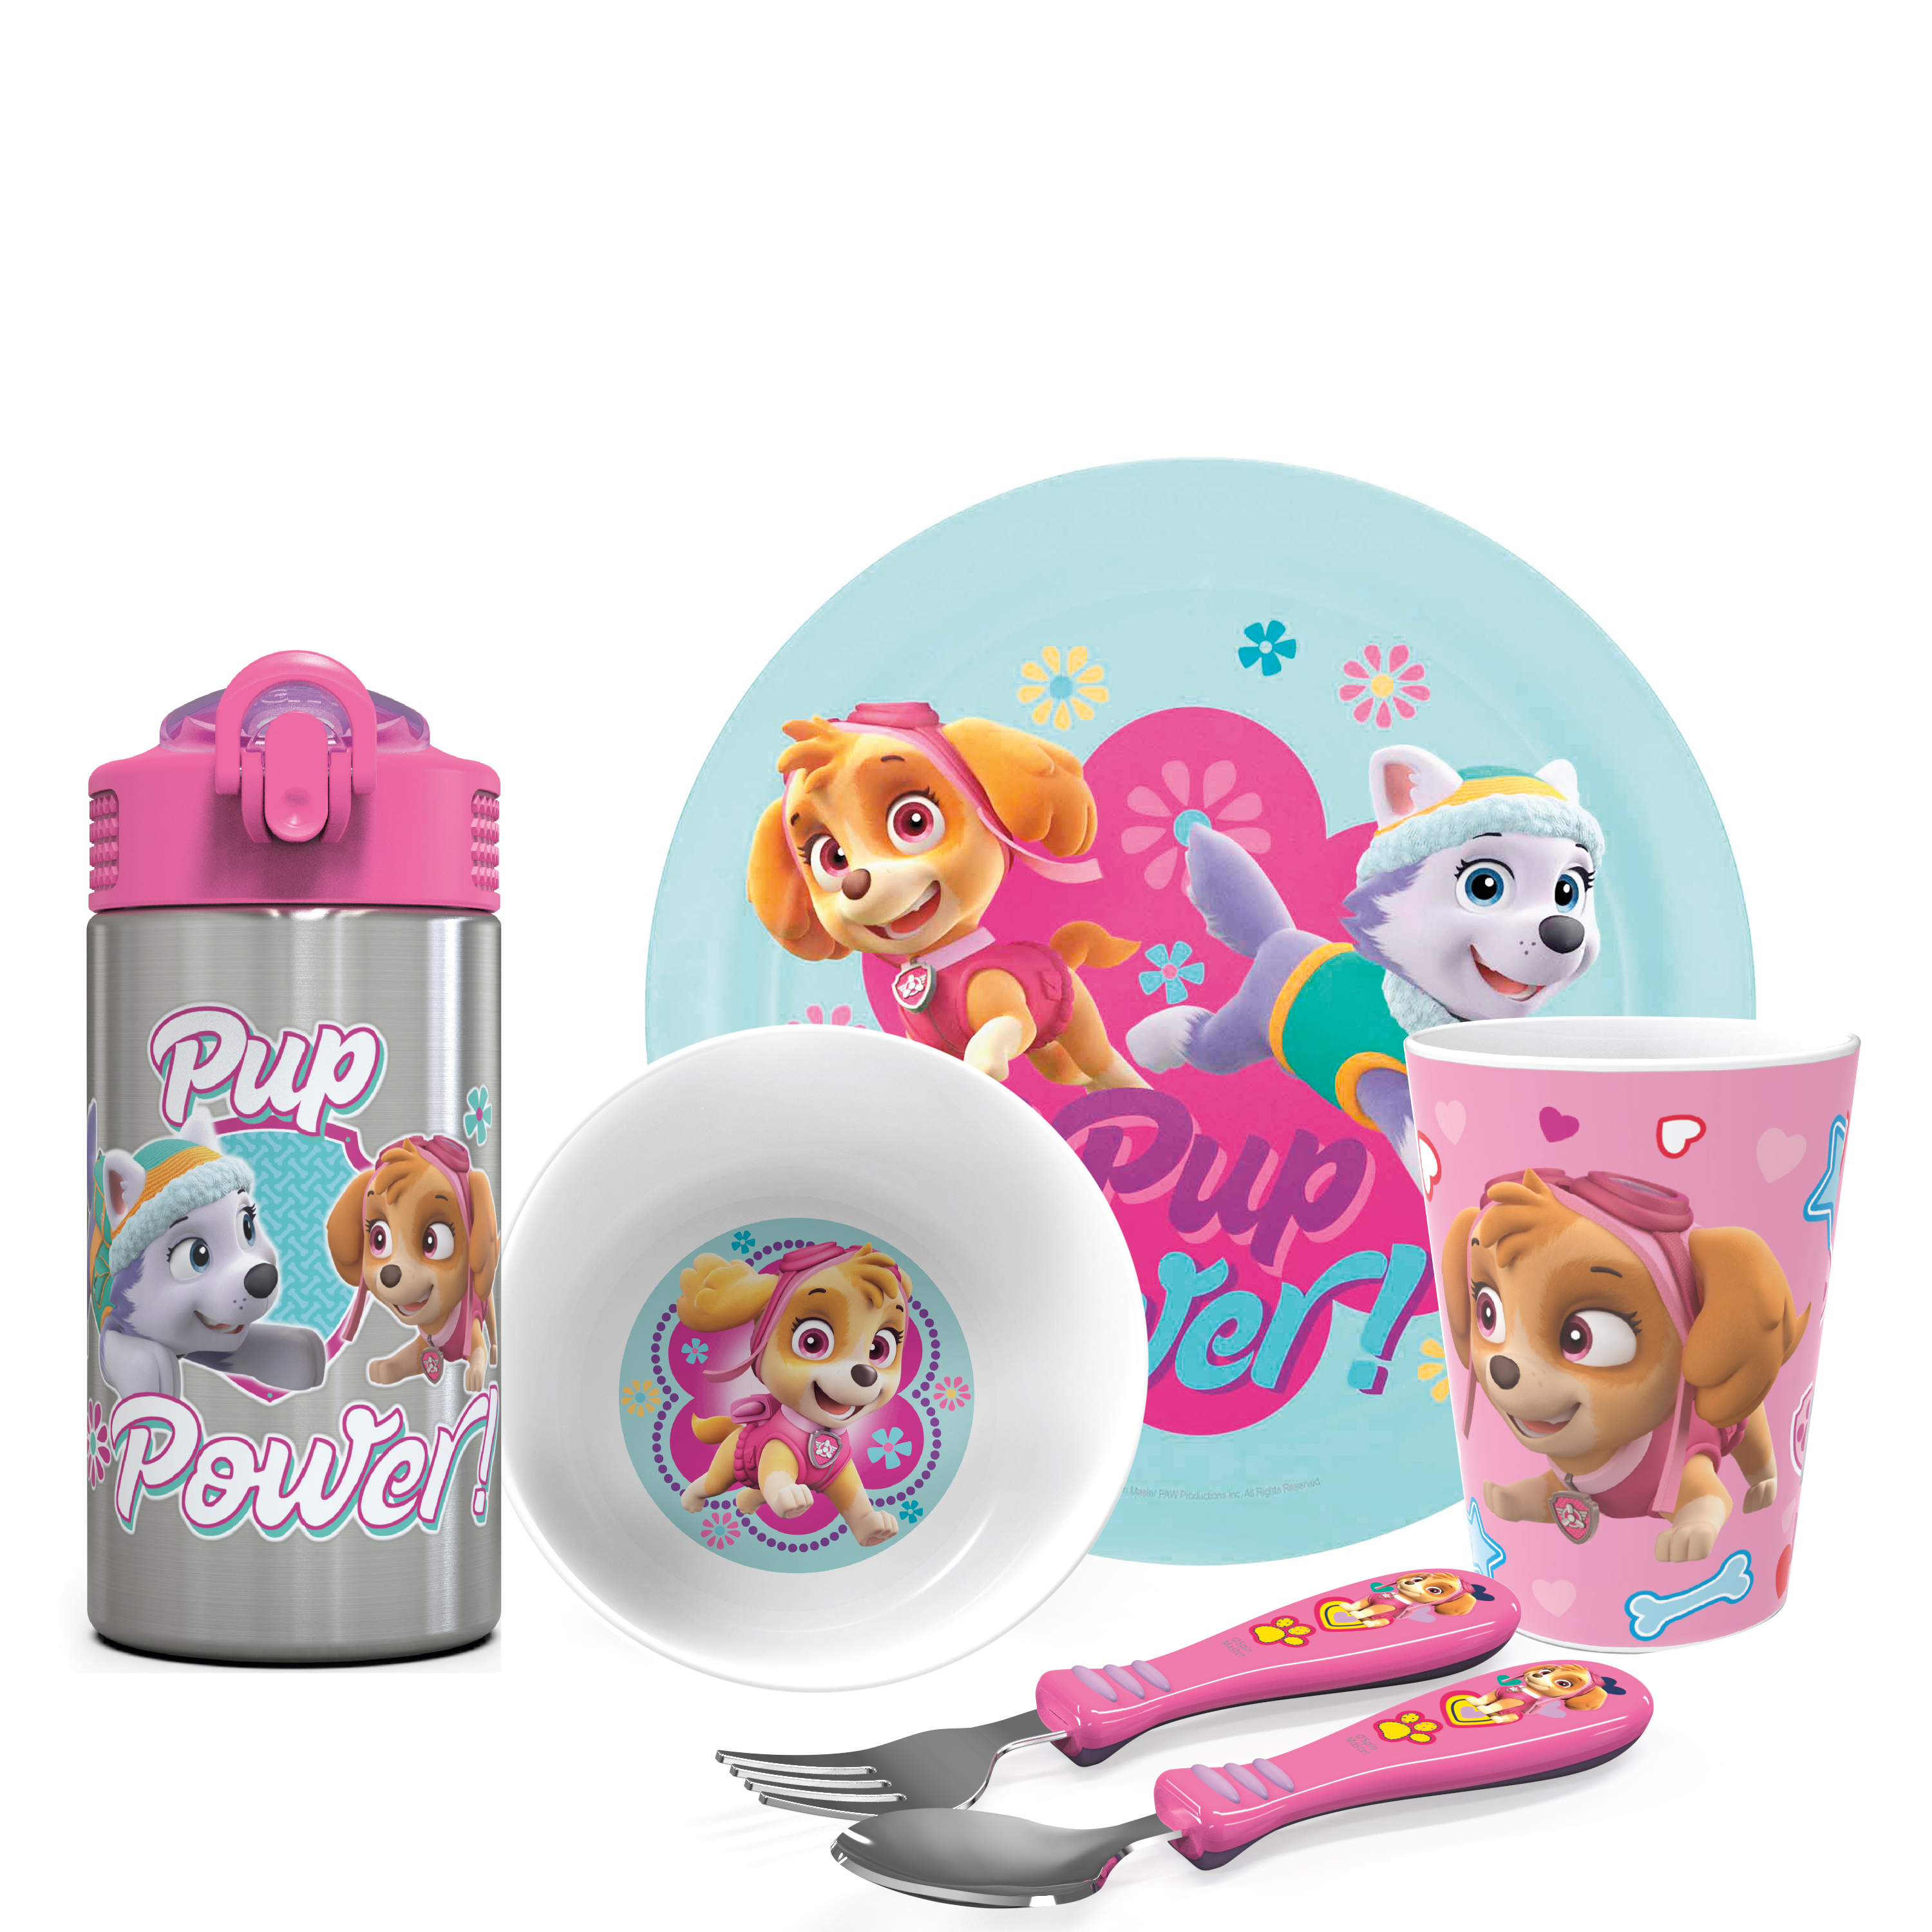 Paw Patrol Plate, Bowl, Tumbler, Water Bottle and Flatware Set for Kids, Everest and Skye, 6-piece set slideshow image 1